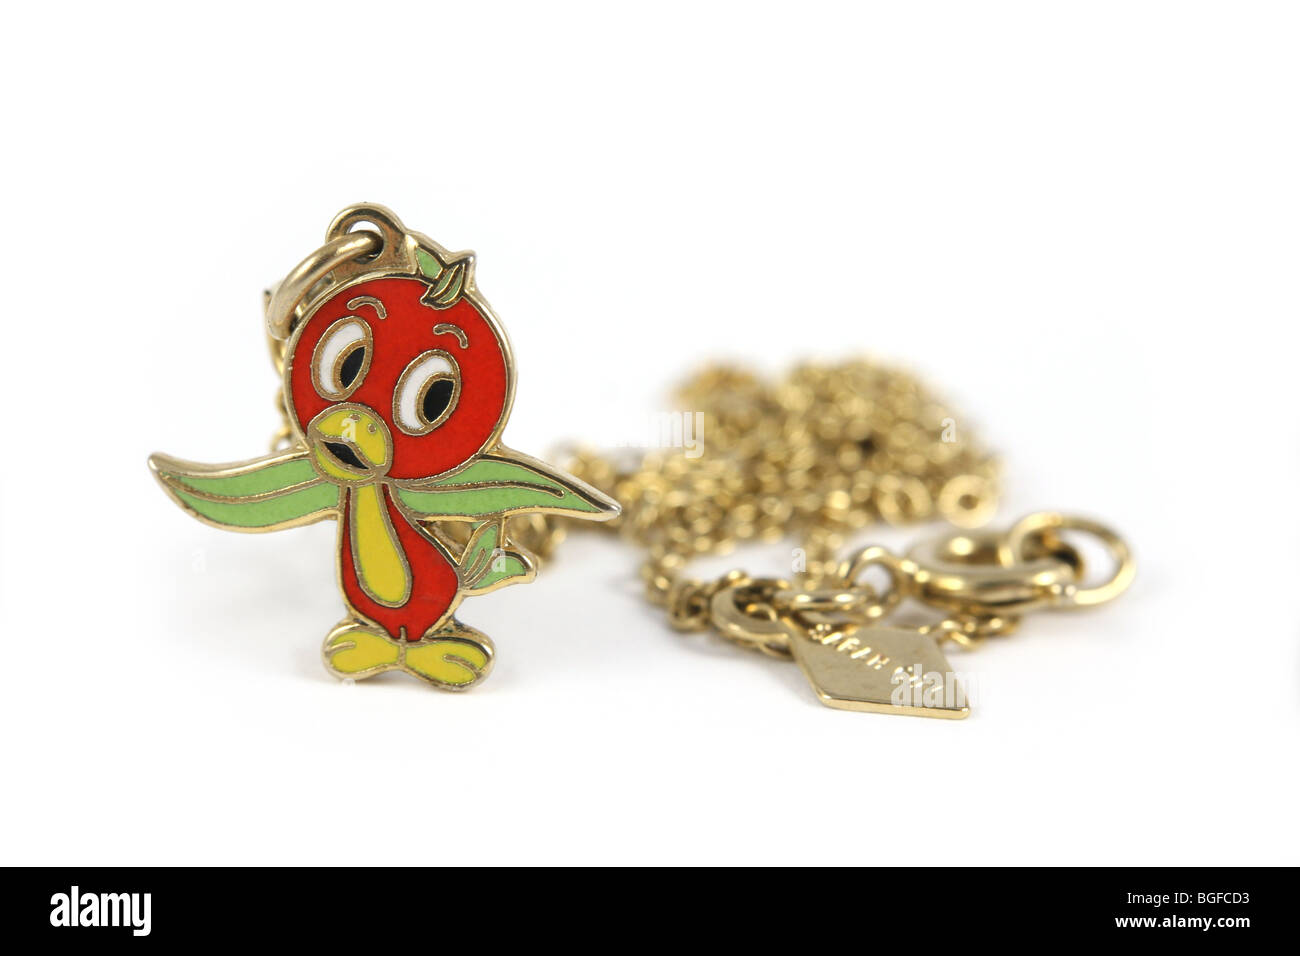 Vintage 1980s Disney's Orange Bird character necklace made by Sarah Coventry. Stock Photo